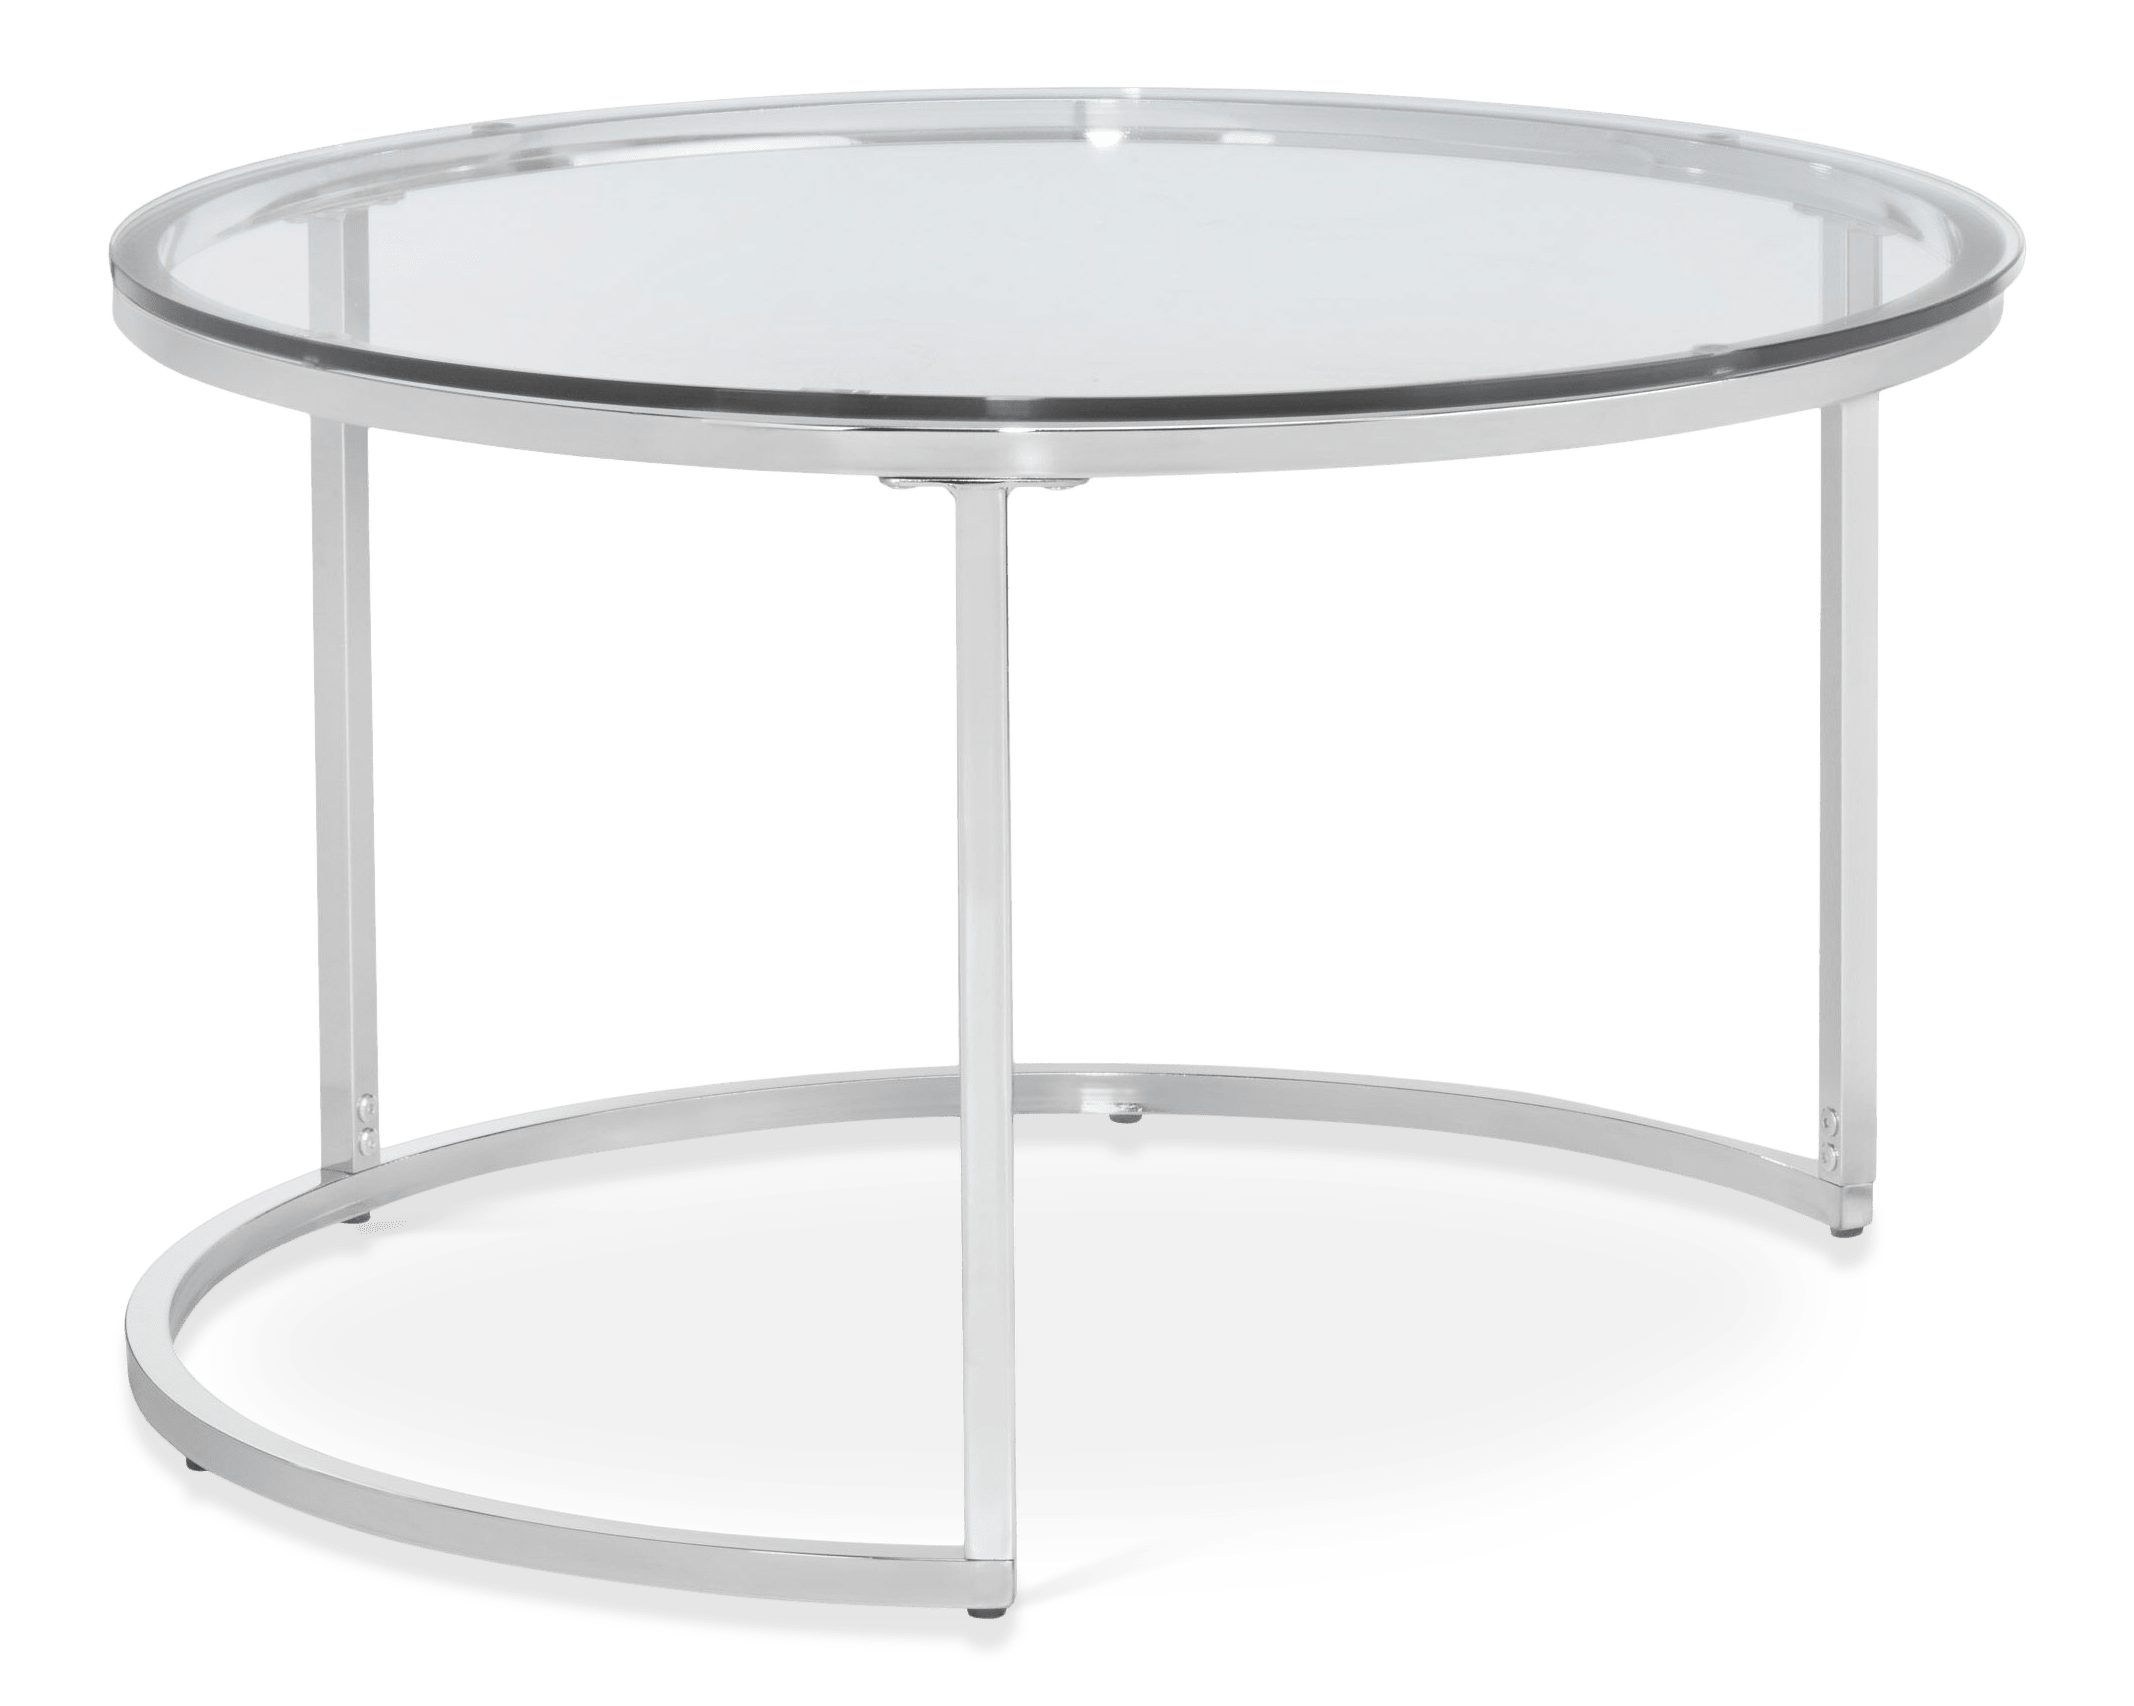 Set of 2 Tempered Glass Coffee Tables with Metal Legs